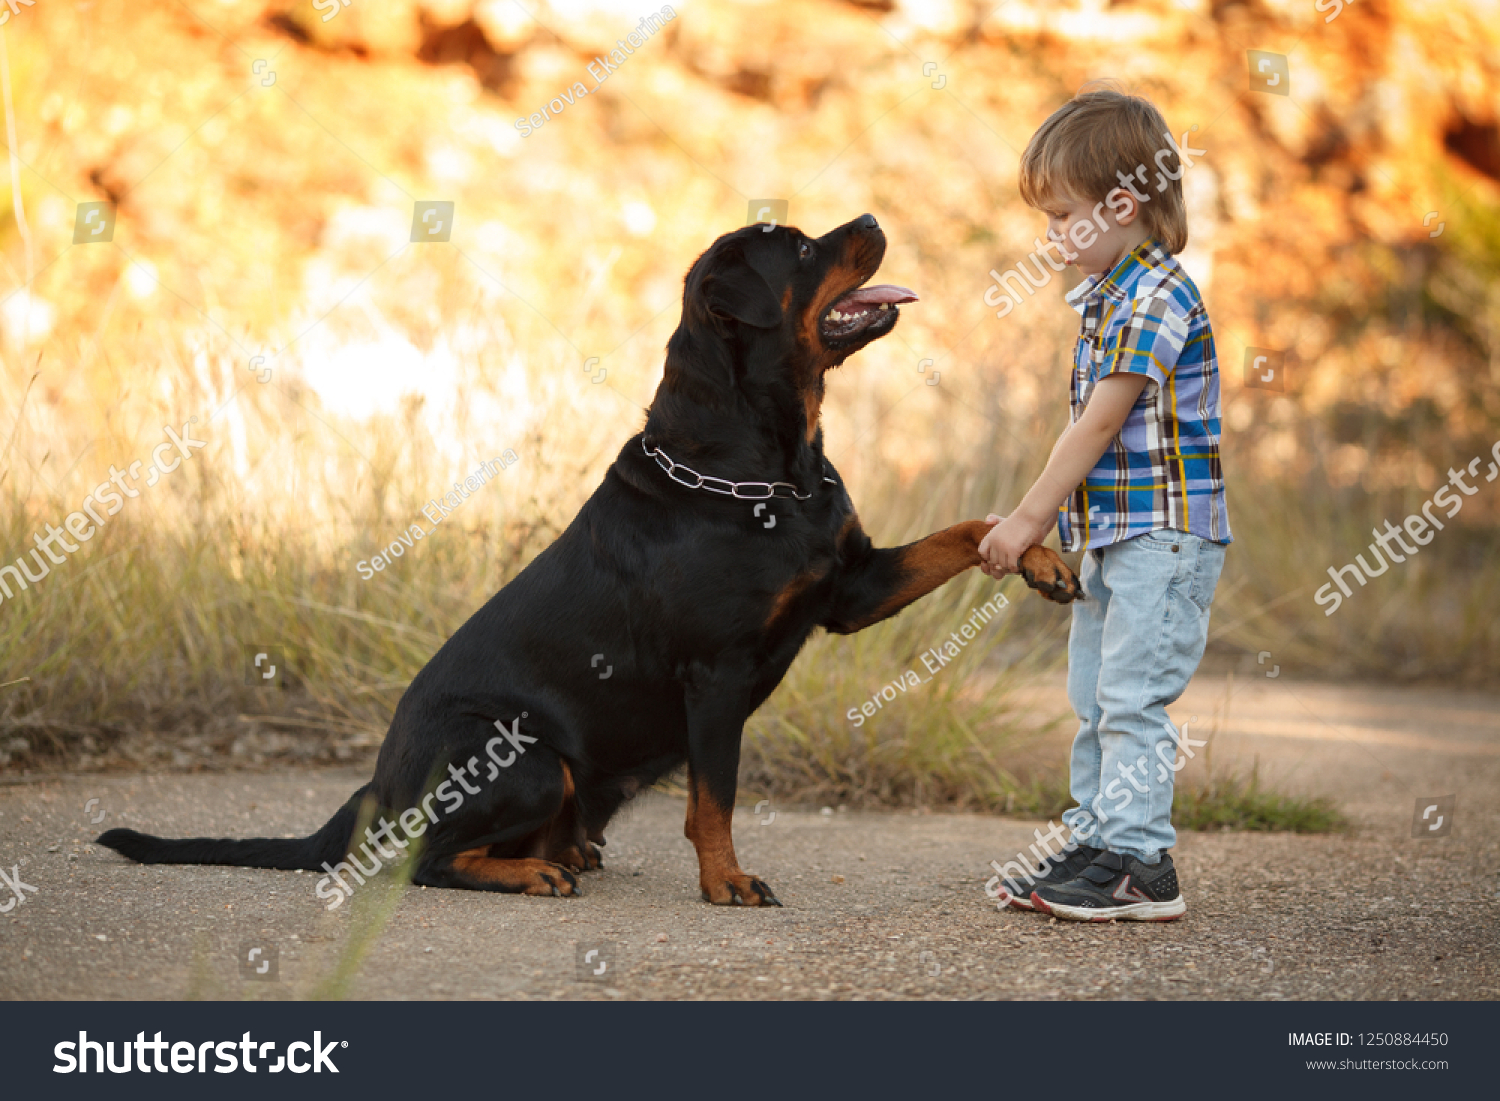 big dog breed Rottweiler gives a paw to a little boy #1250884450